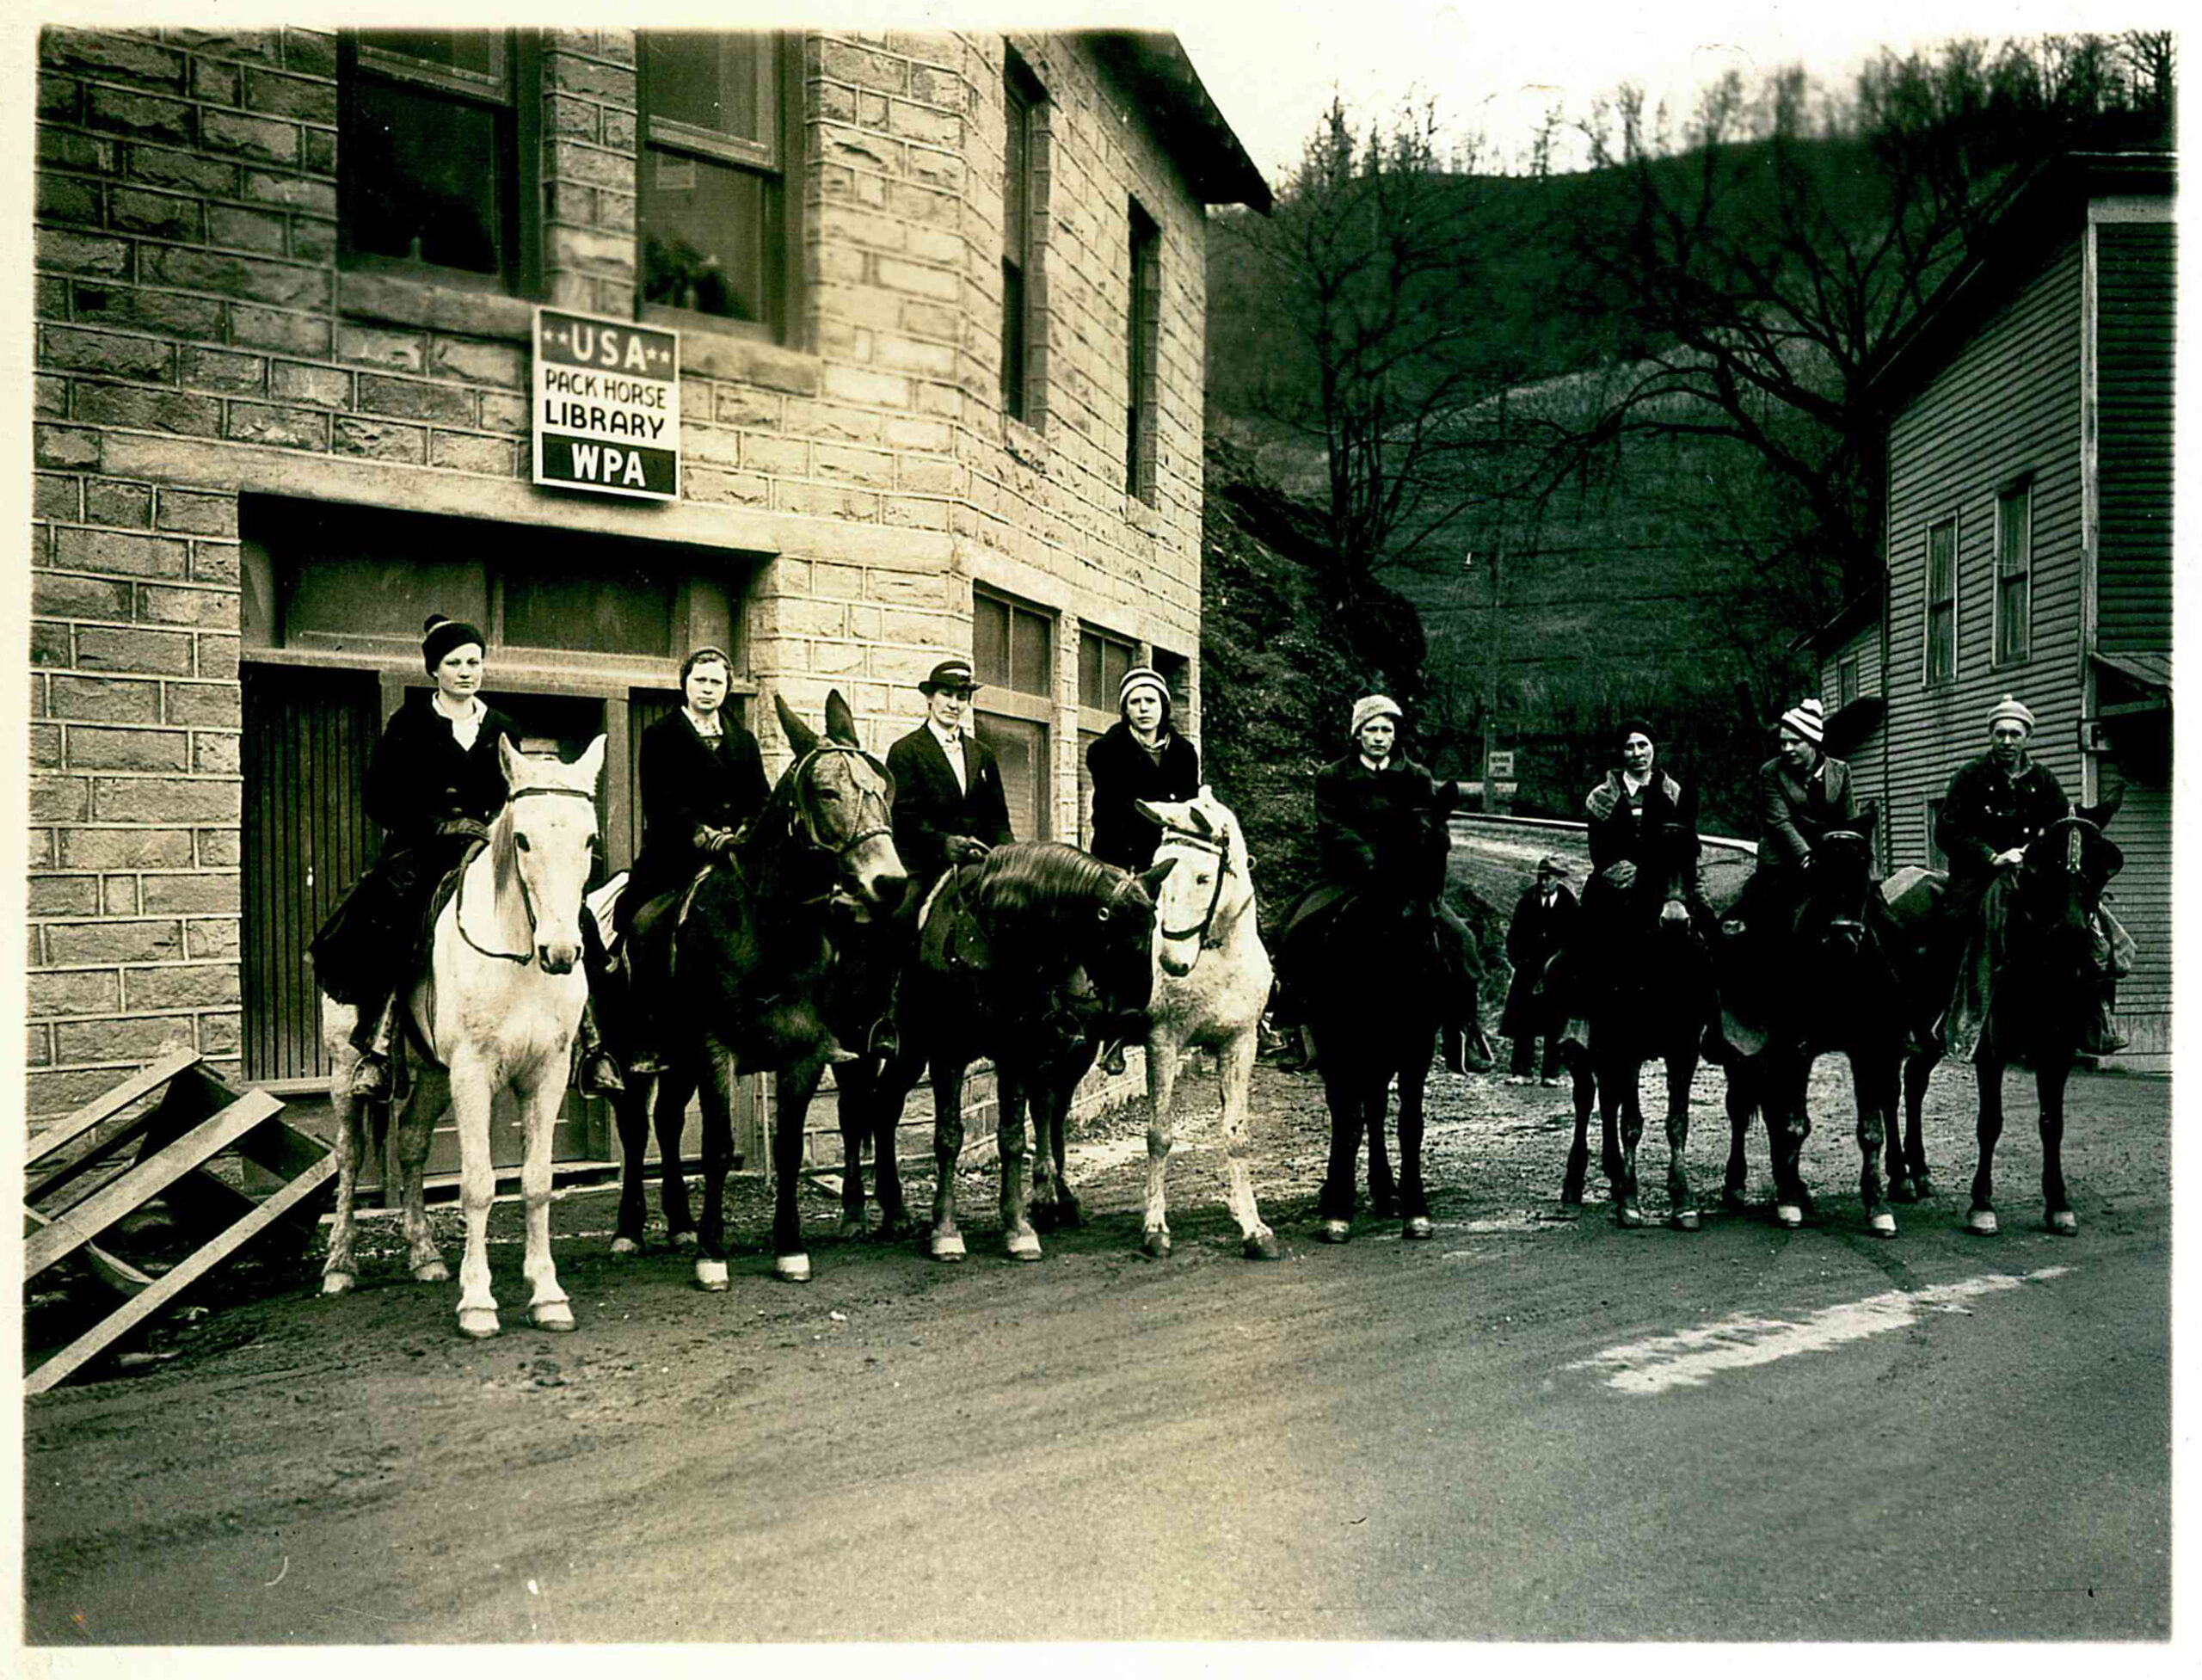 WPA packhorse librarians that supplied children in rural communities with books – NAI: 148728414